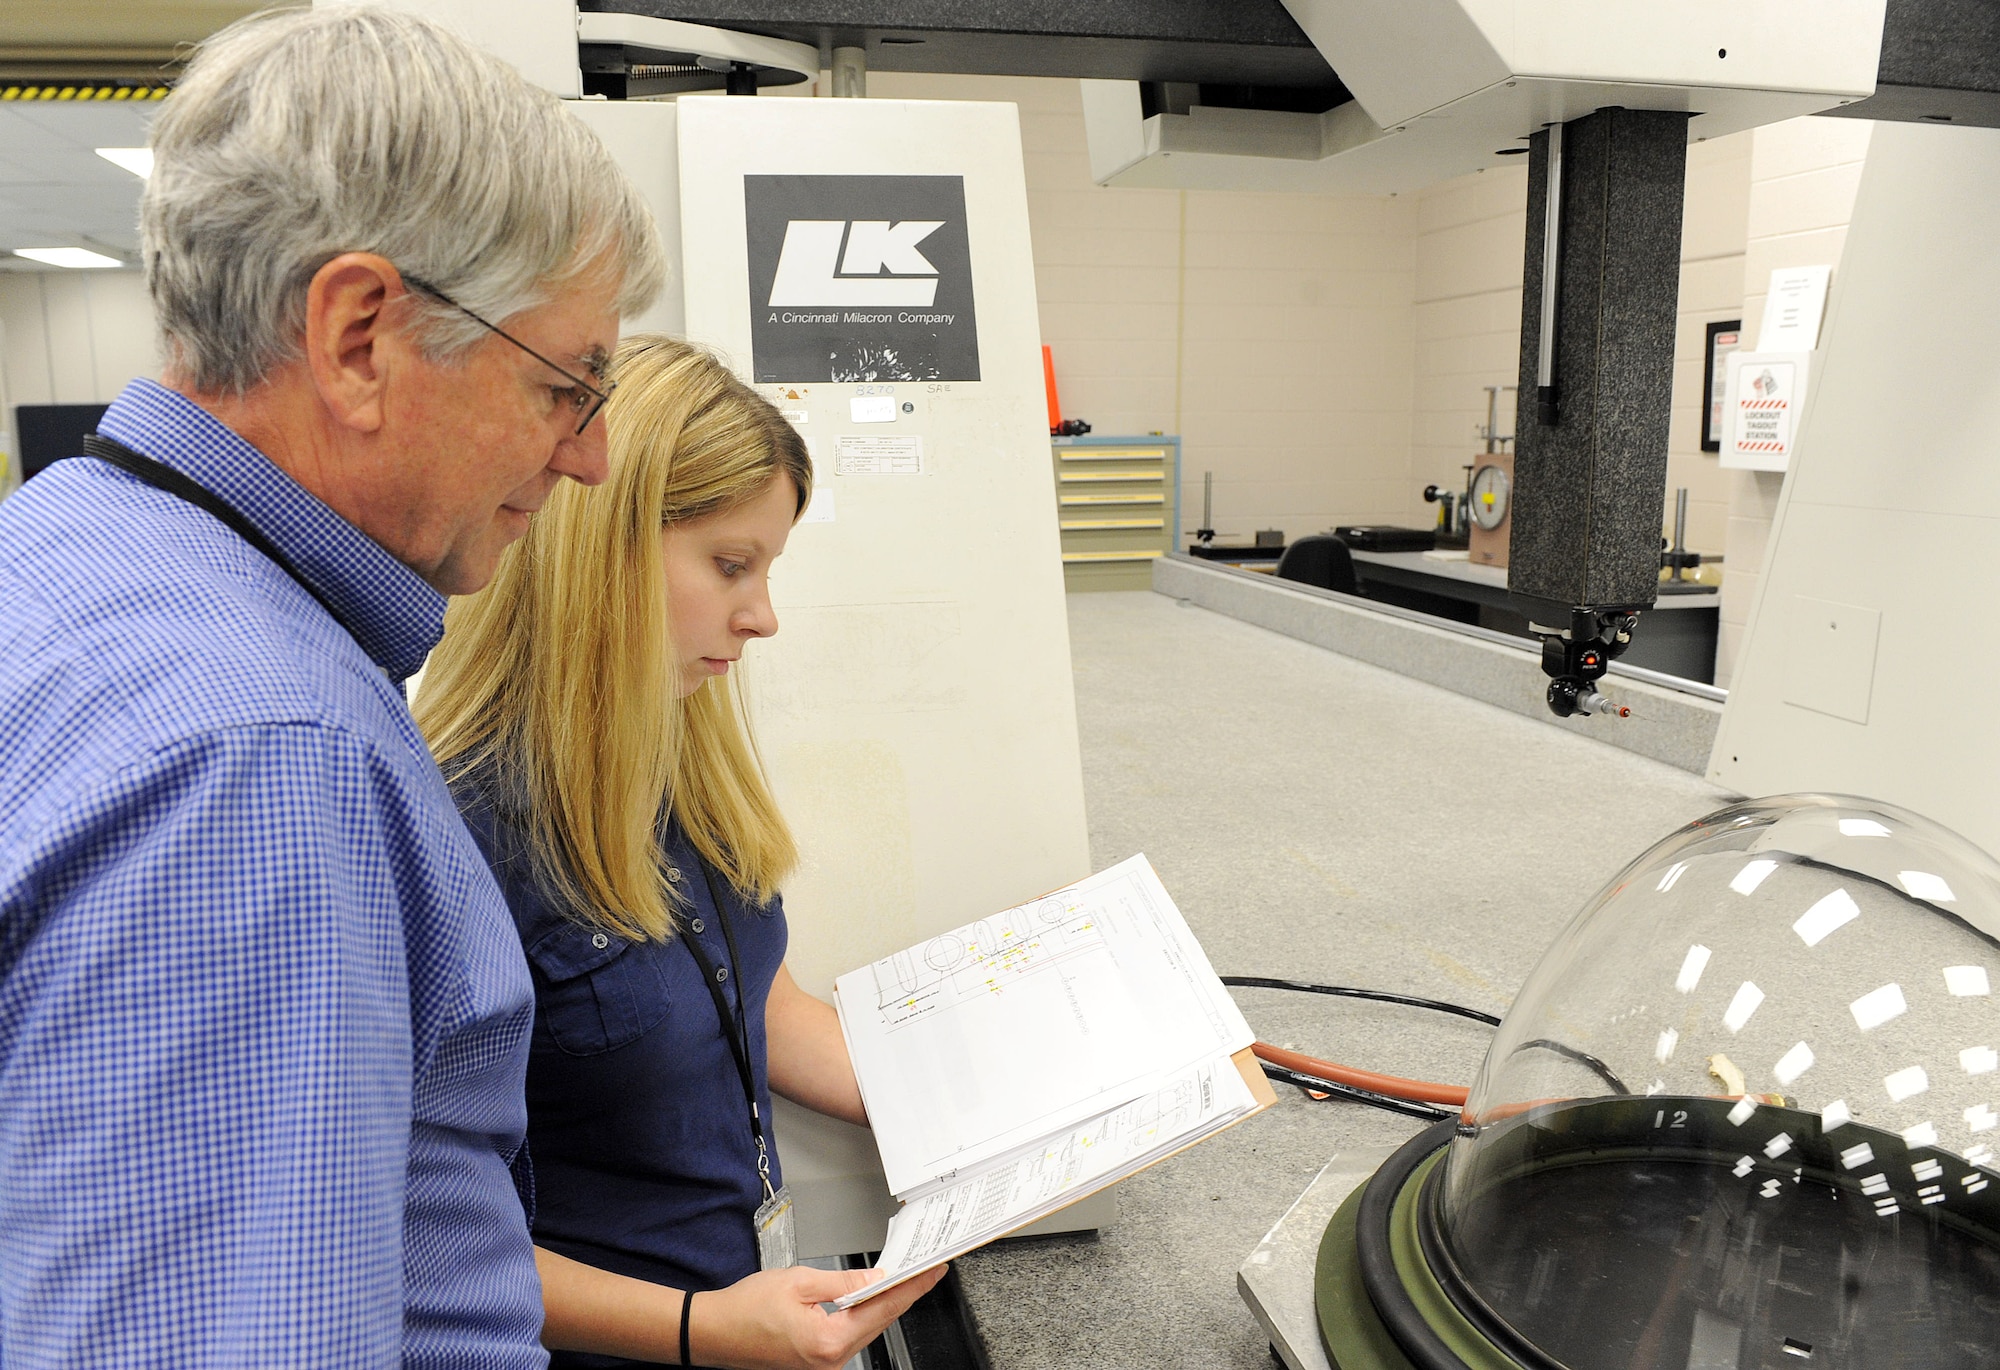 Gary Strandburg (left), a mechanical engineer in the 802nd Maintenance Support Squadron, and Kayla Brown, a C-130 structural engineer in the Aerospace Sustainment Directorate, consult on dimensional analysis and test plans for a C-130 Rear Vision Device. (U.S. Air Force photo by Tommie Horton)